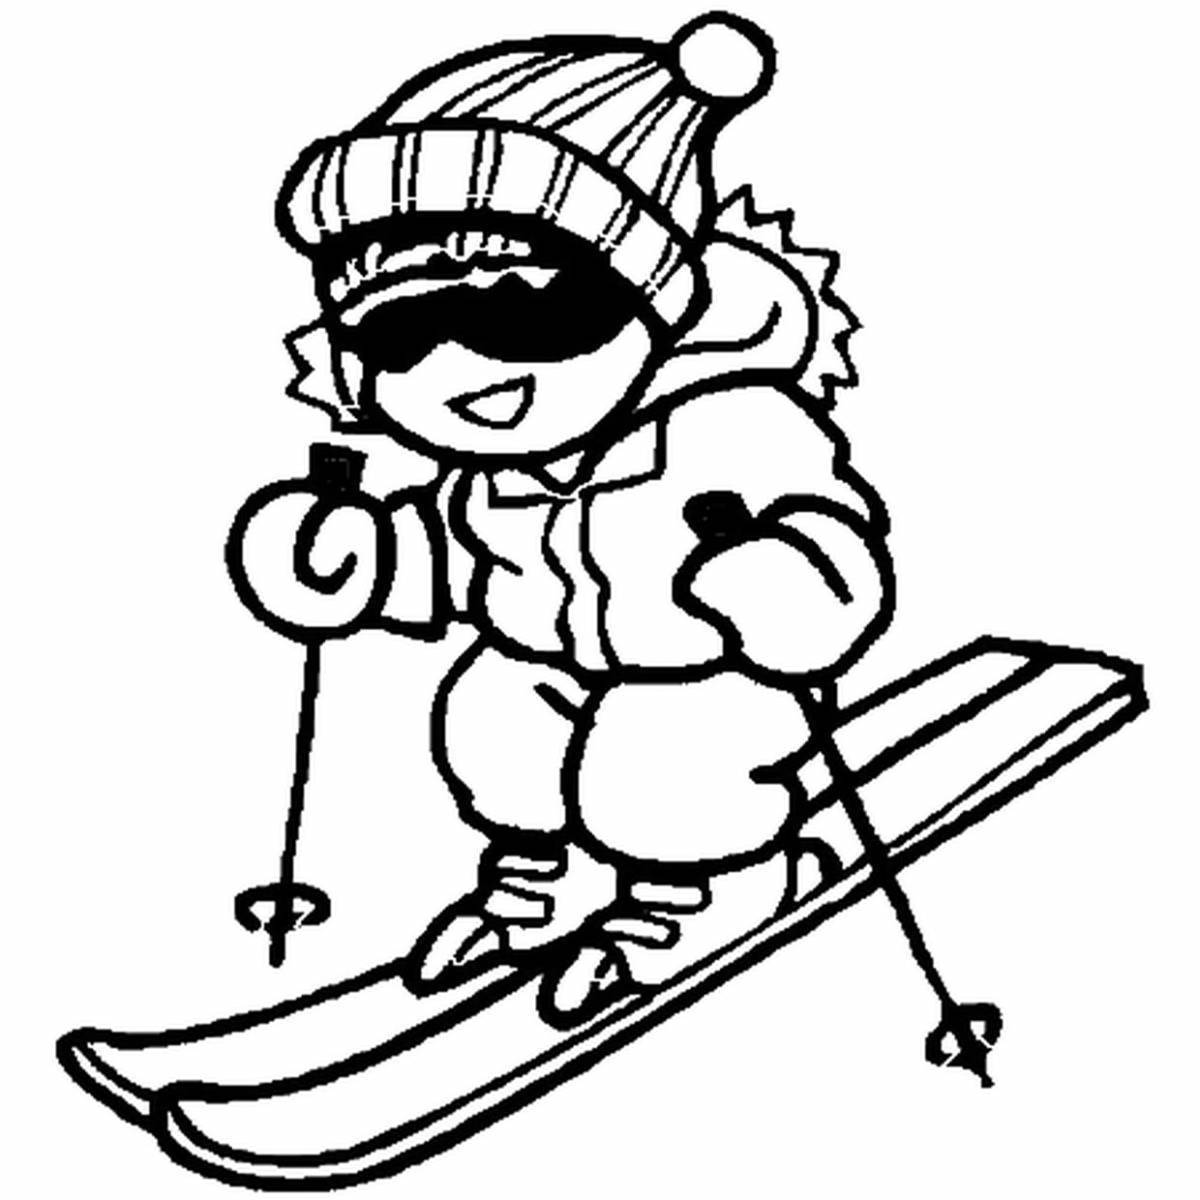 Animated skier coloring page